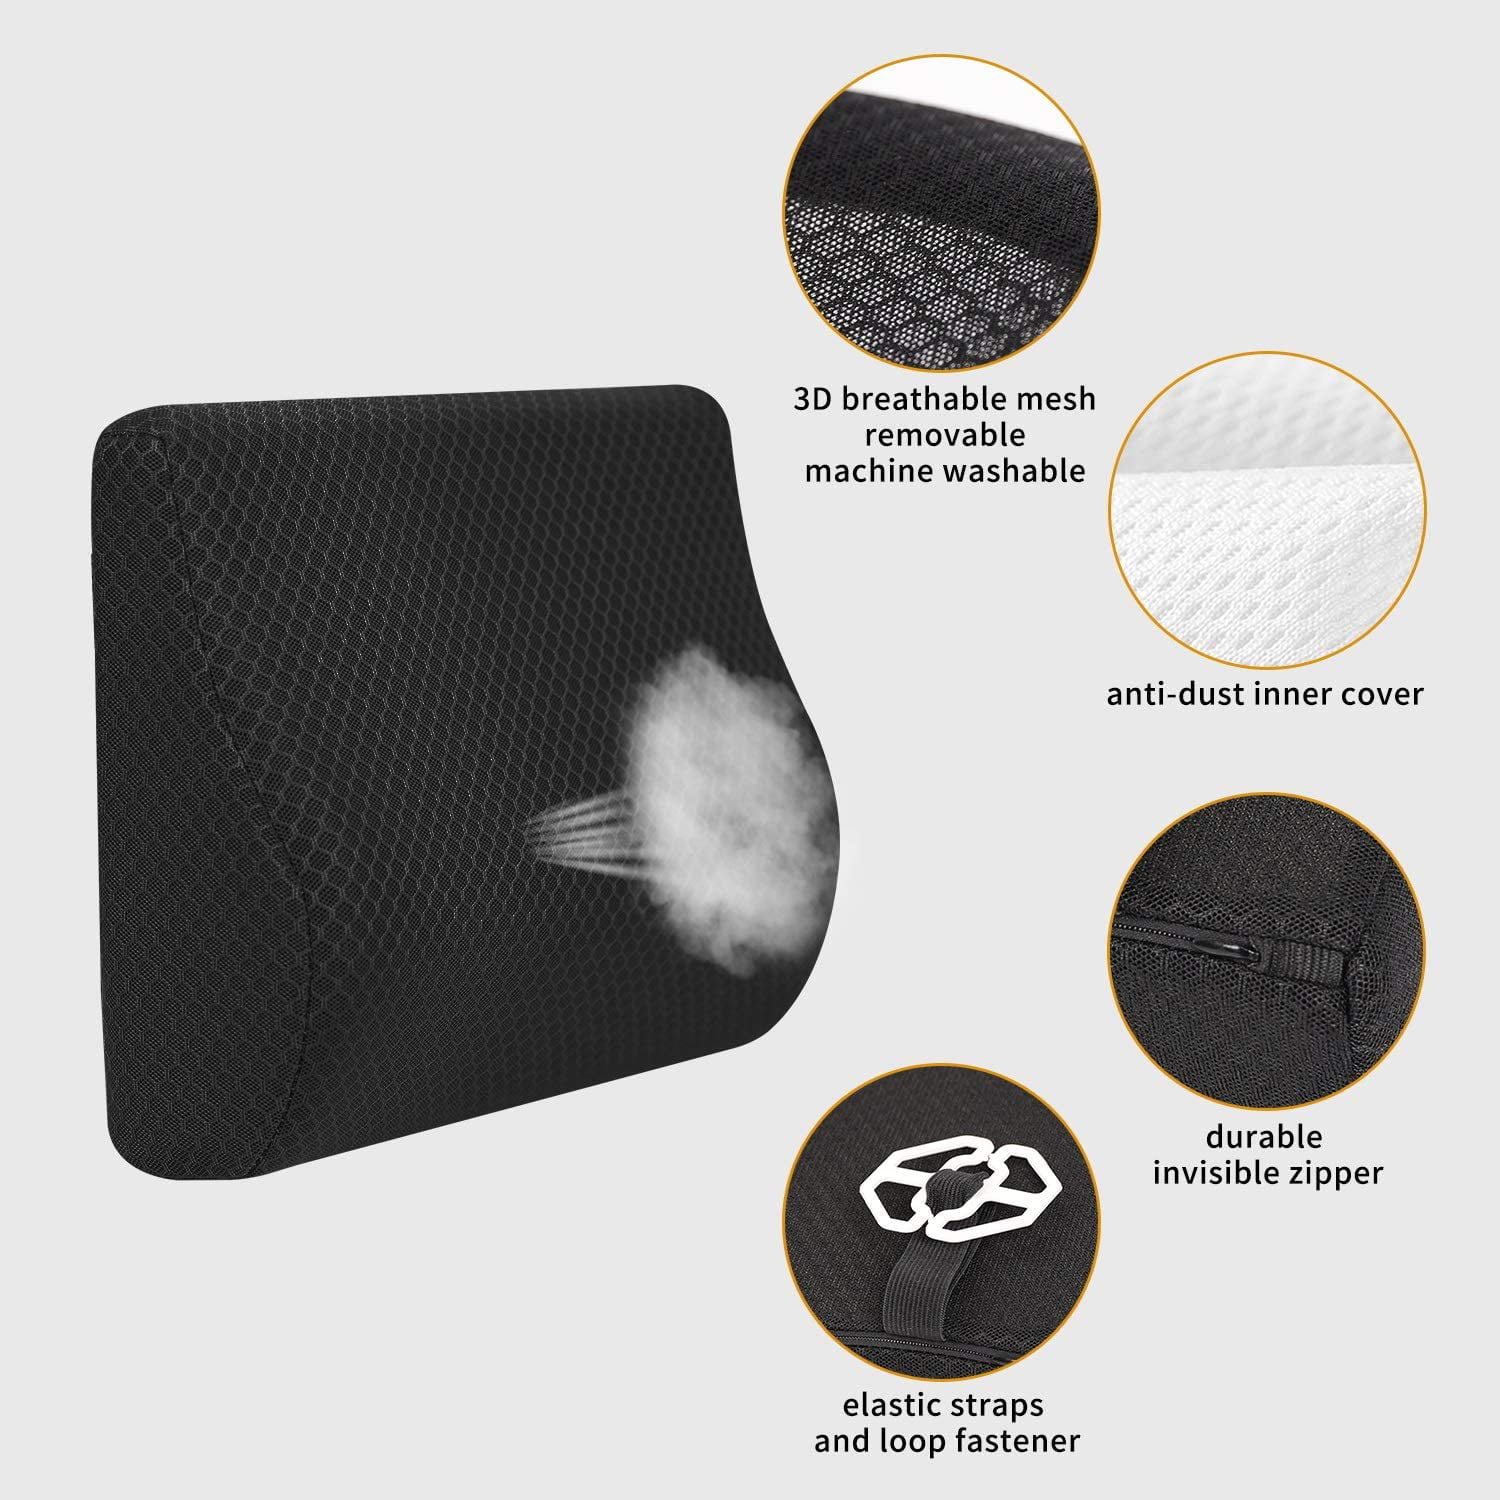 TISHIJIE Memory Foam Lumbar Support for Car Office Chair Recliner Etc. for Car Seat Beige Designed for Mid/Lower Back Pain Relief While Driving 